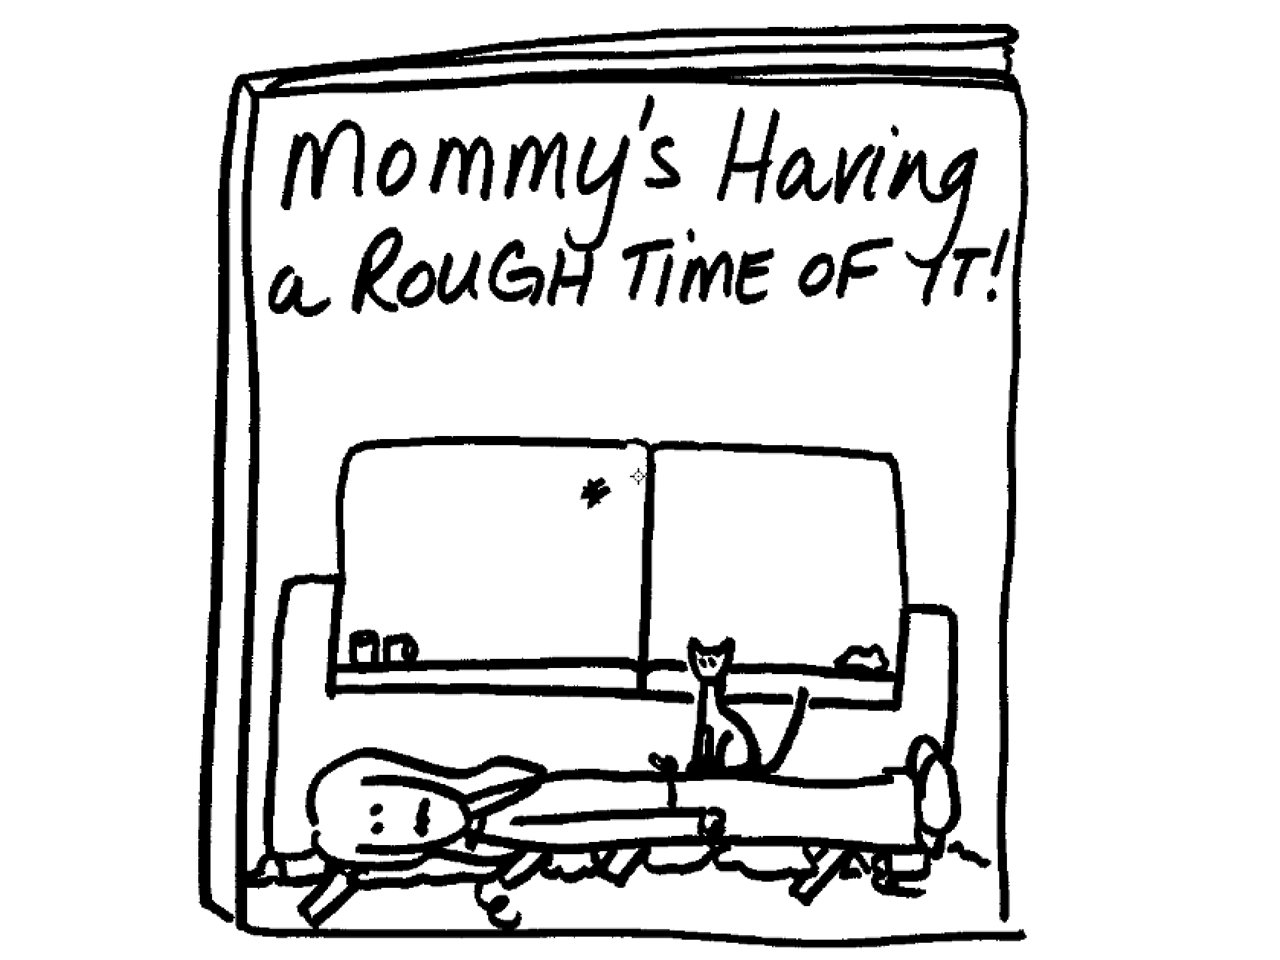 Illustration of a book titled "Mommy's Having a Rough Time of It!"